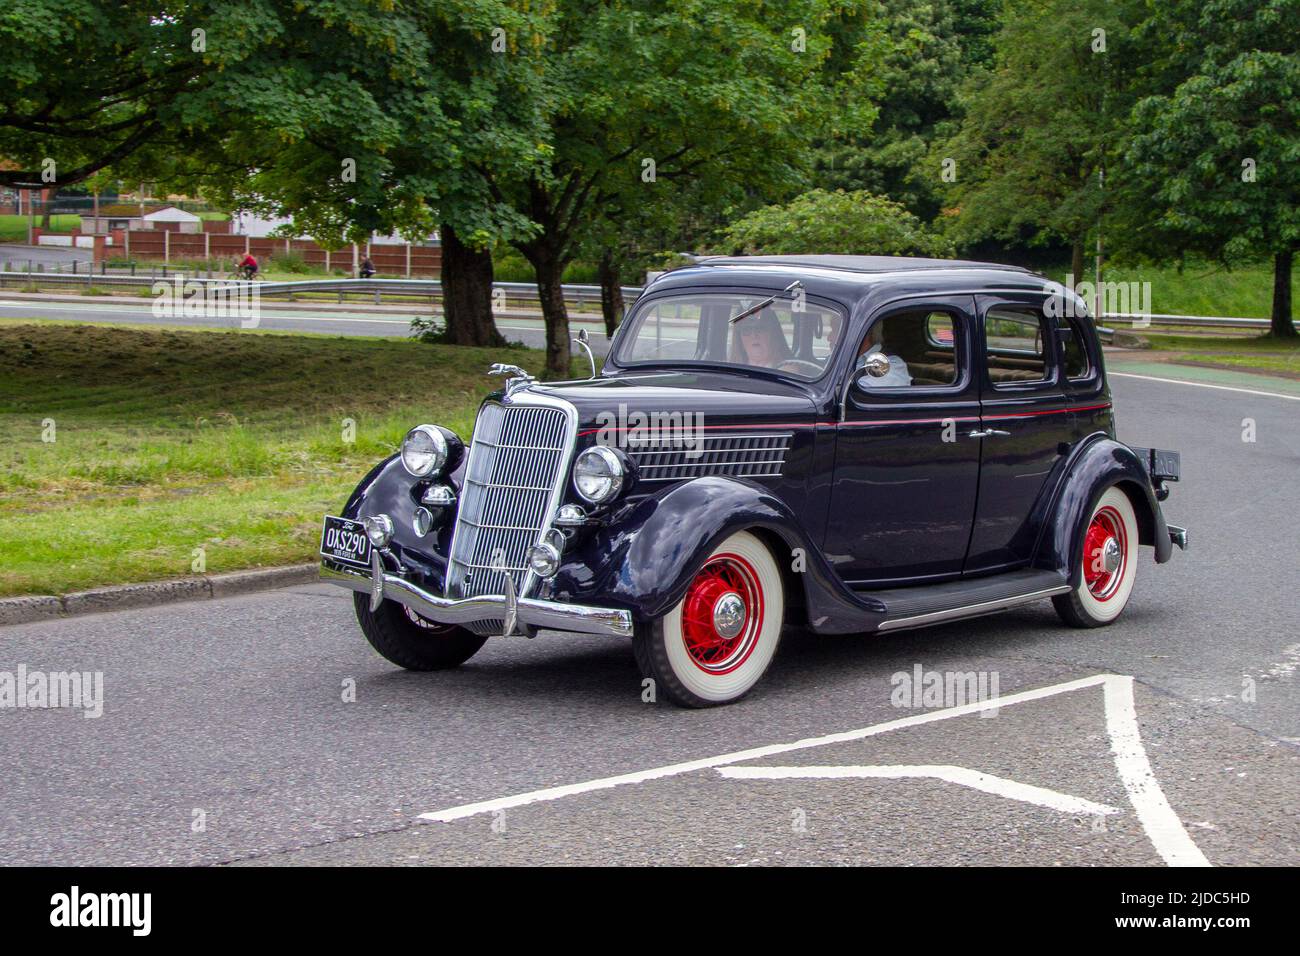 1935 30s thirties Black pre-war Ford Model Y 3600cc petrol sedan; automobiles featured during the 58th year of the Manchester to Blackpool Touring Assembly for Veteran, Vintage, Classic and Cherished cars. Stock Photo